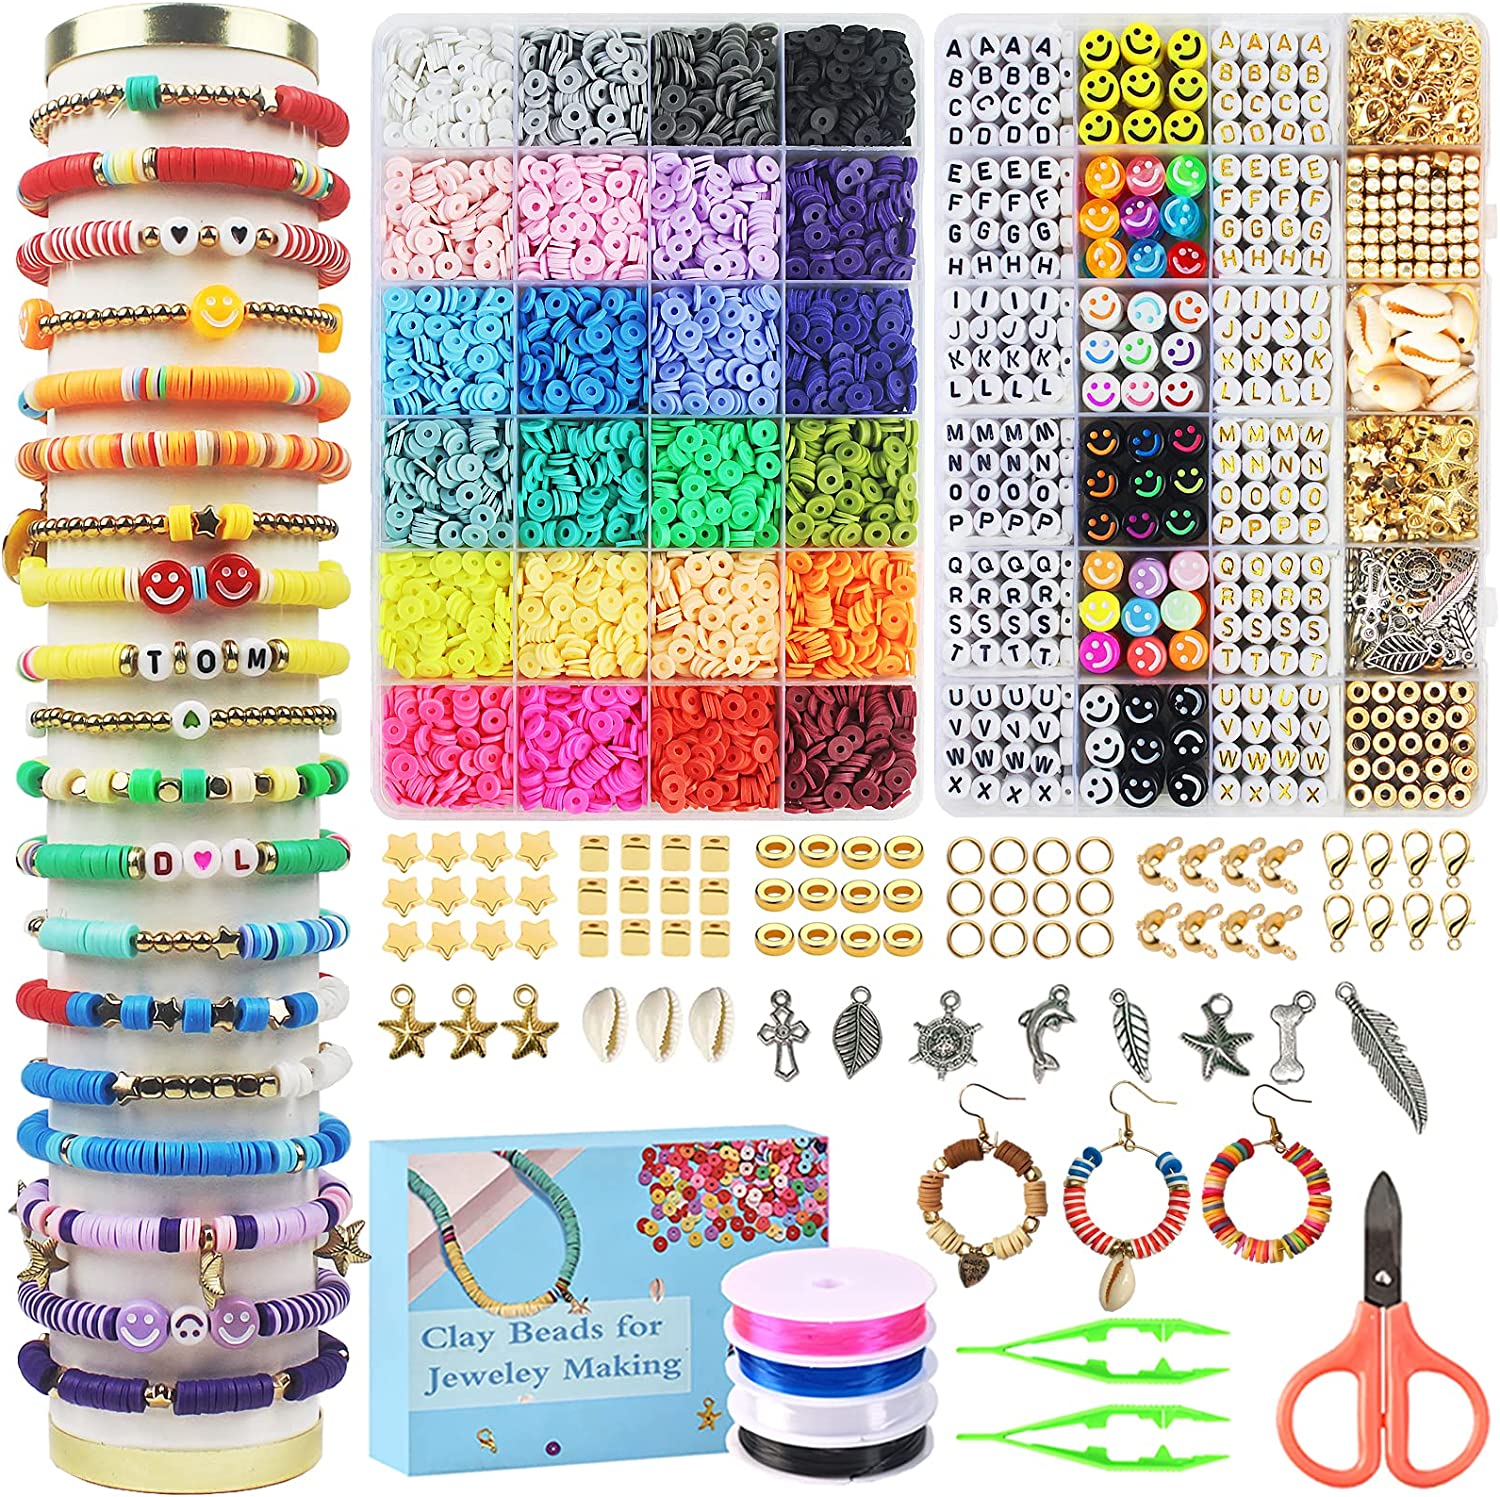 Deinduser Clay Beads 2 Boxes Bracelet Making Kit - 24 Colors Polymer C